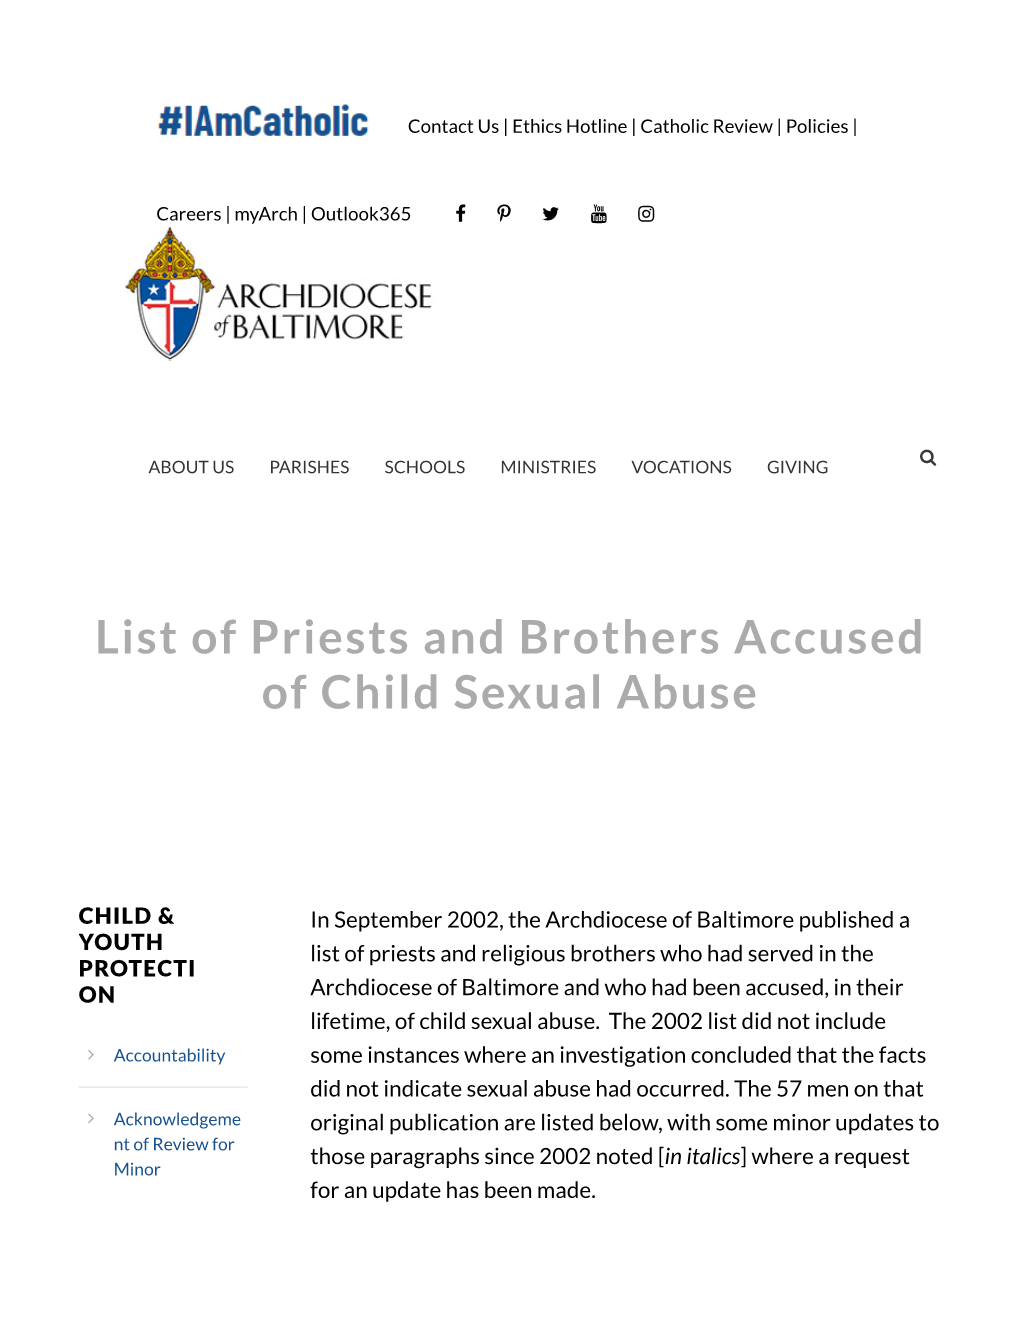 List of Priests and Brothers Accused of Child Sexual Abuse